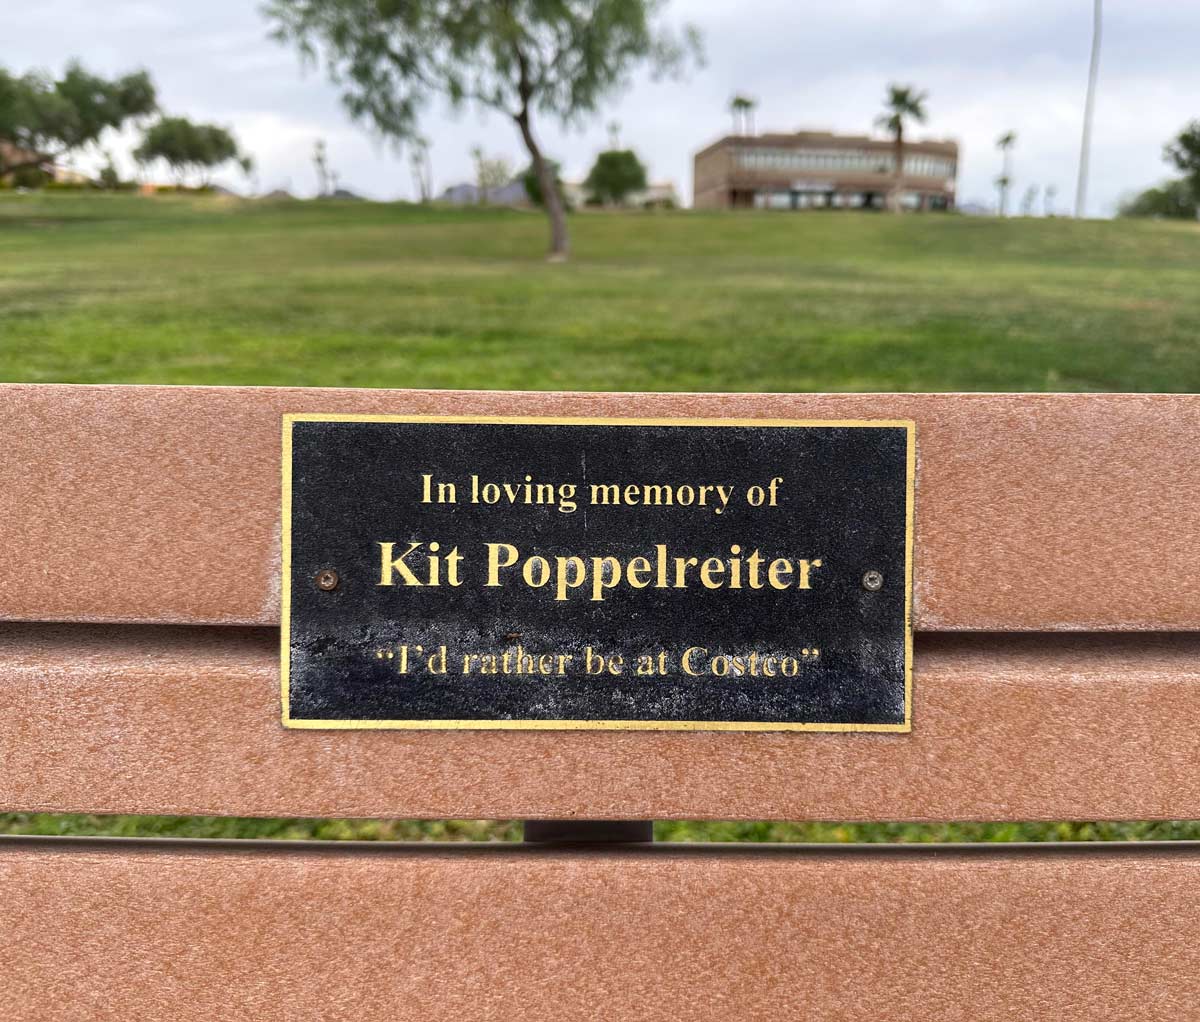 I found this memorial bench in Fountain Hills, Arizona